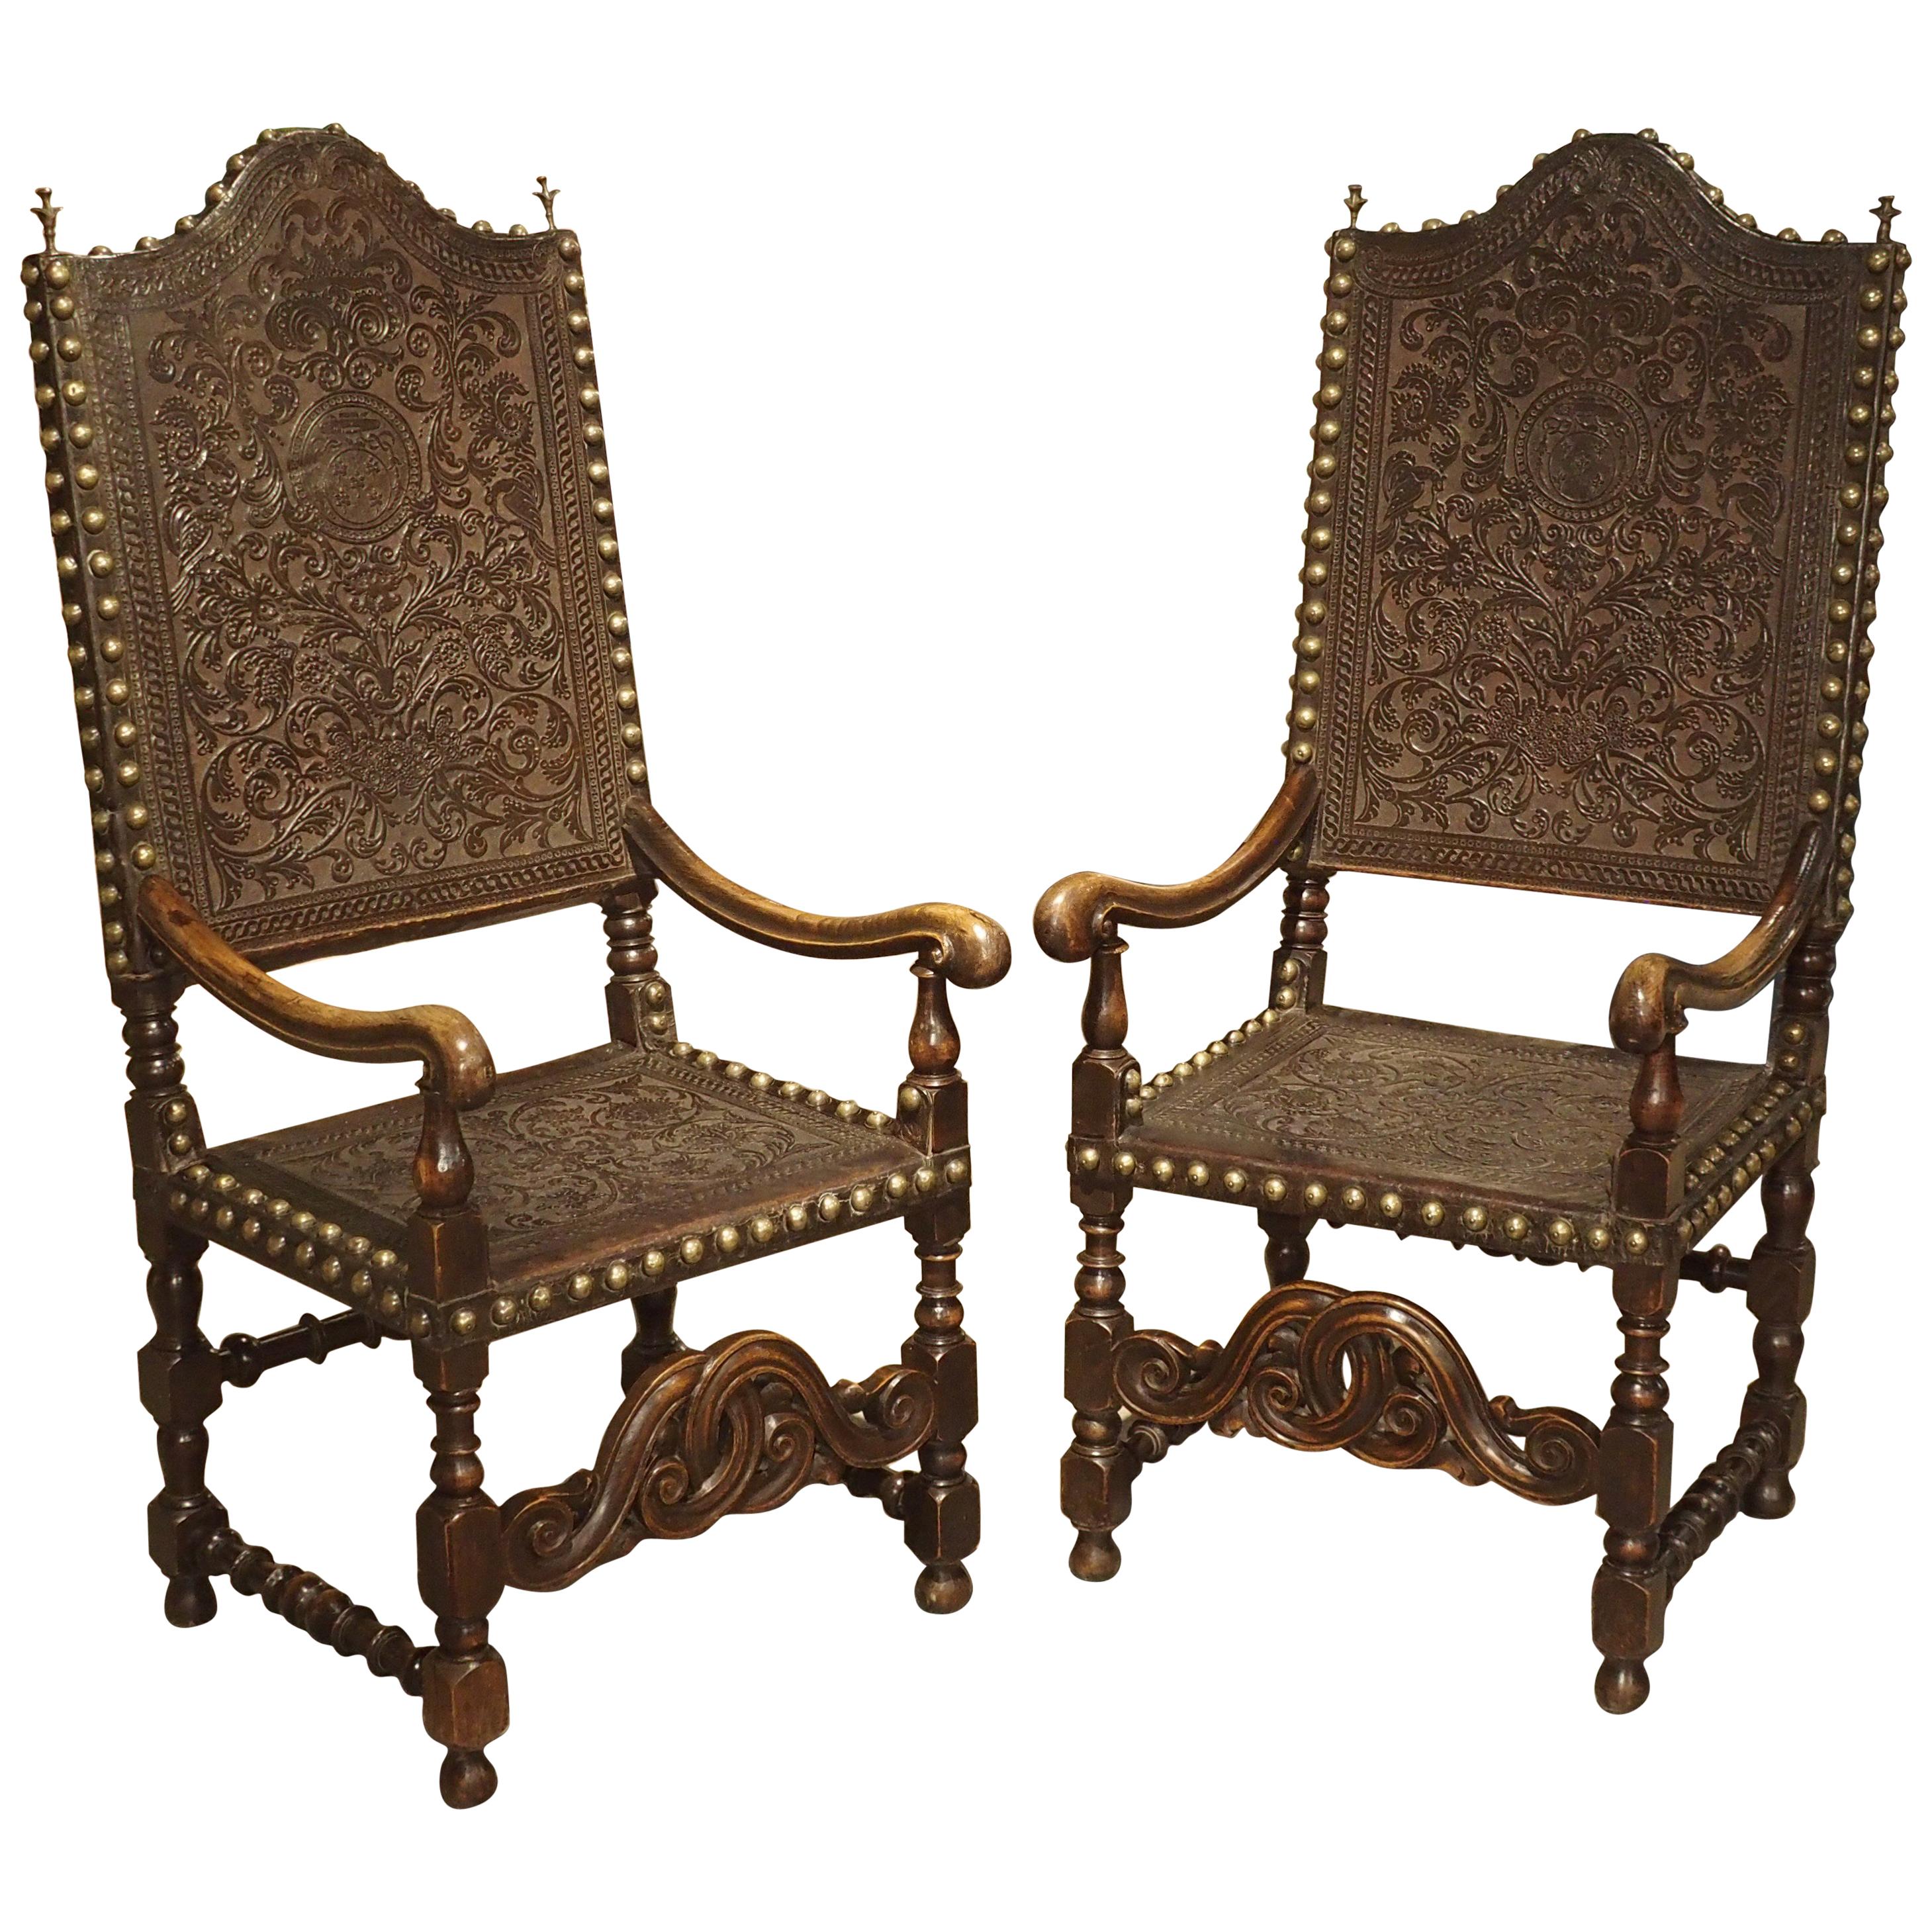 Pair of Large 17th Century Tooled Leather and Oak Armchairs from Spain